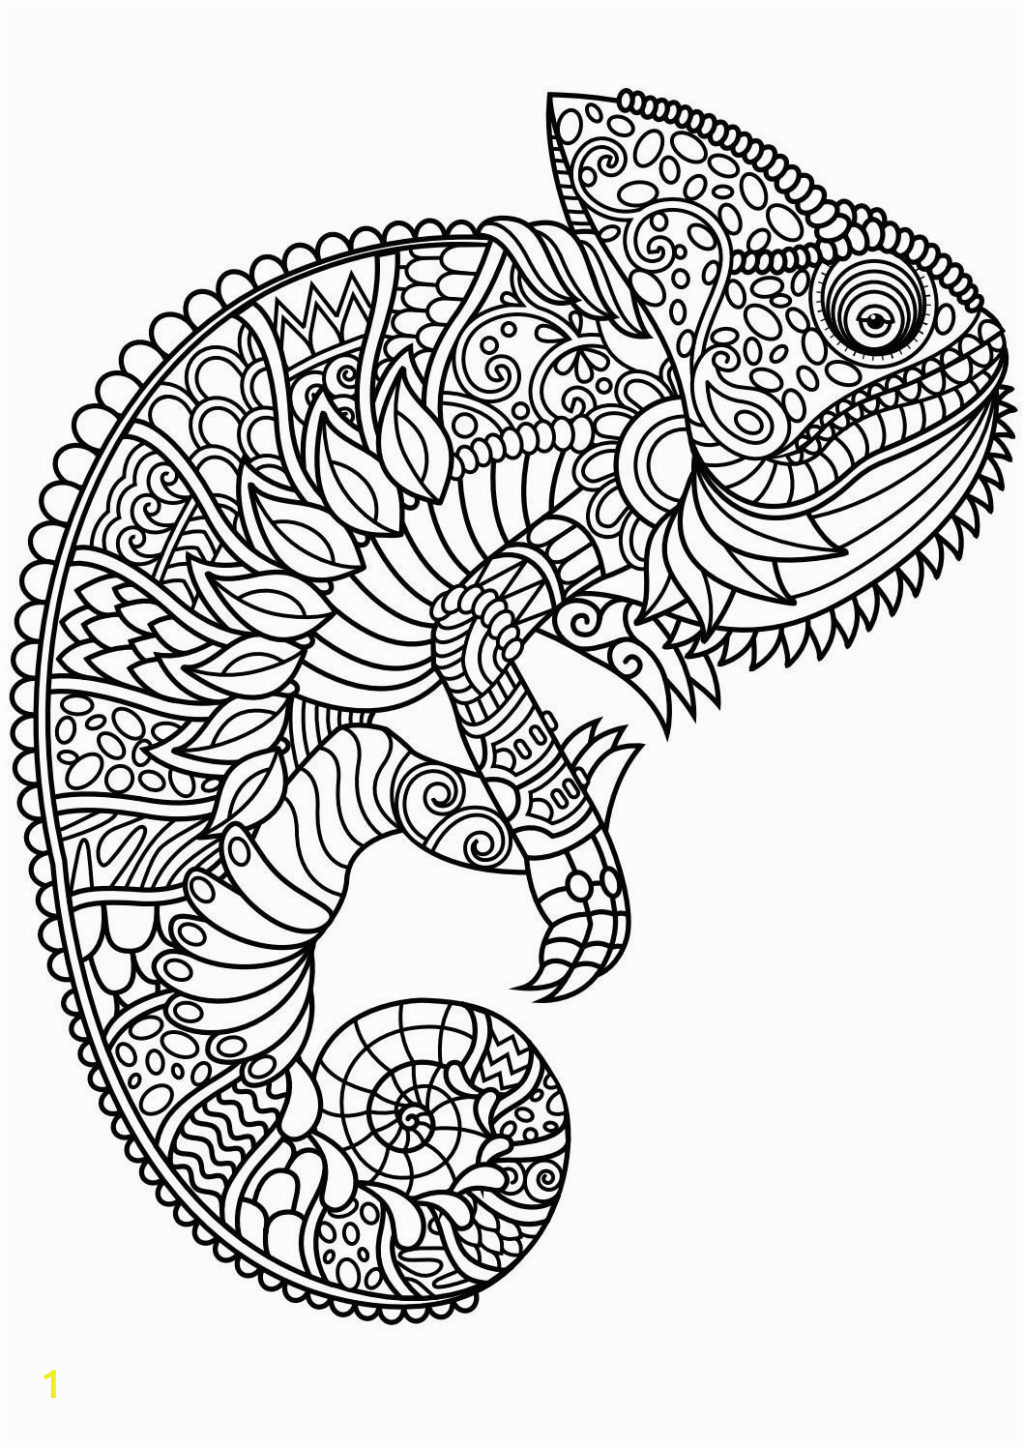 free dog coloring pages coloring page free coloringagesdfrintable animal best od dog